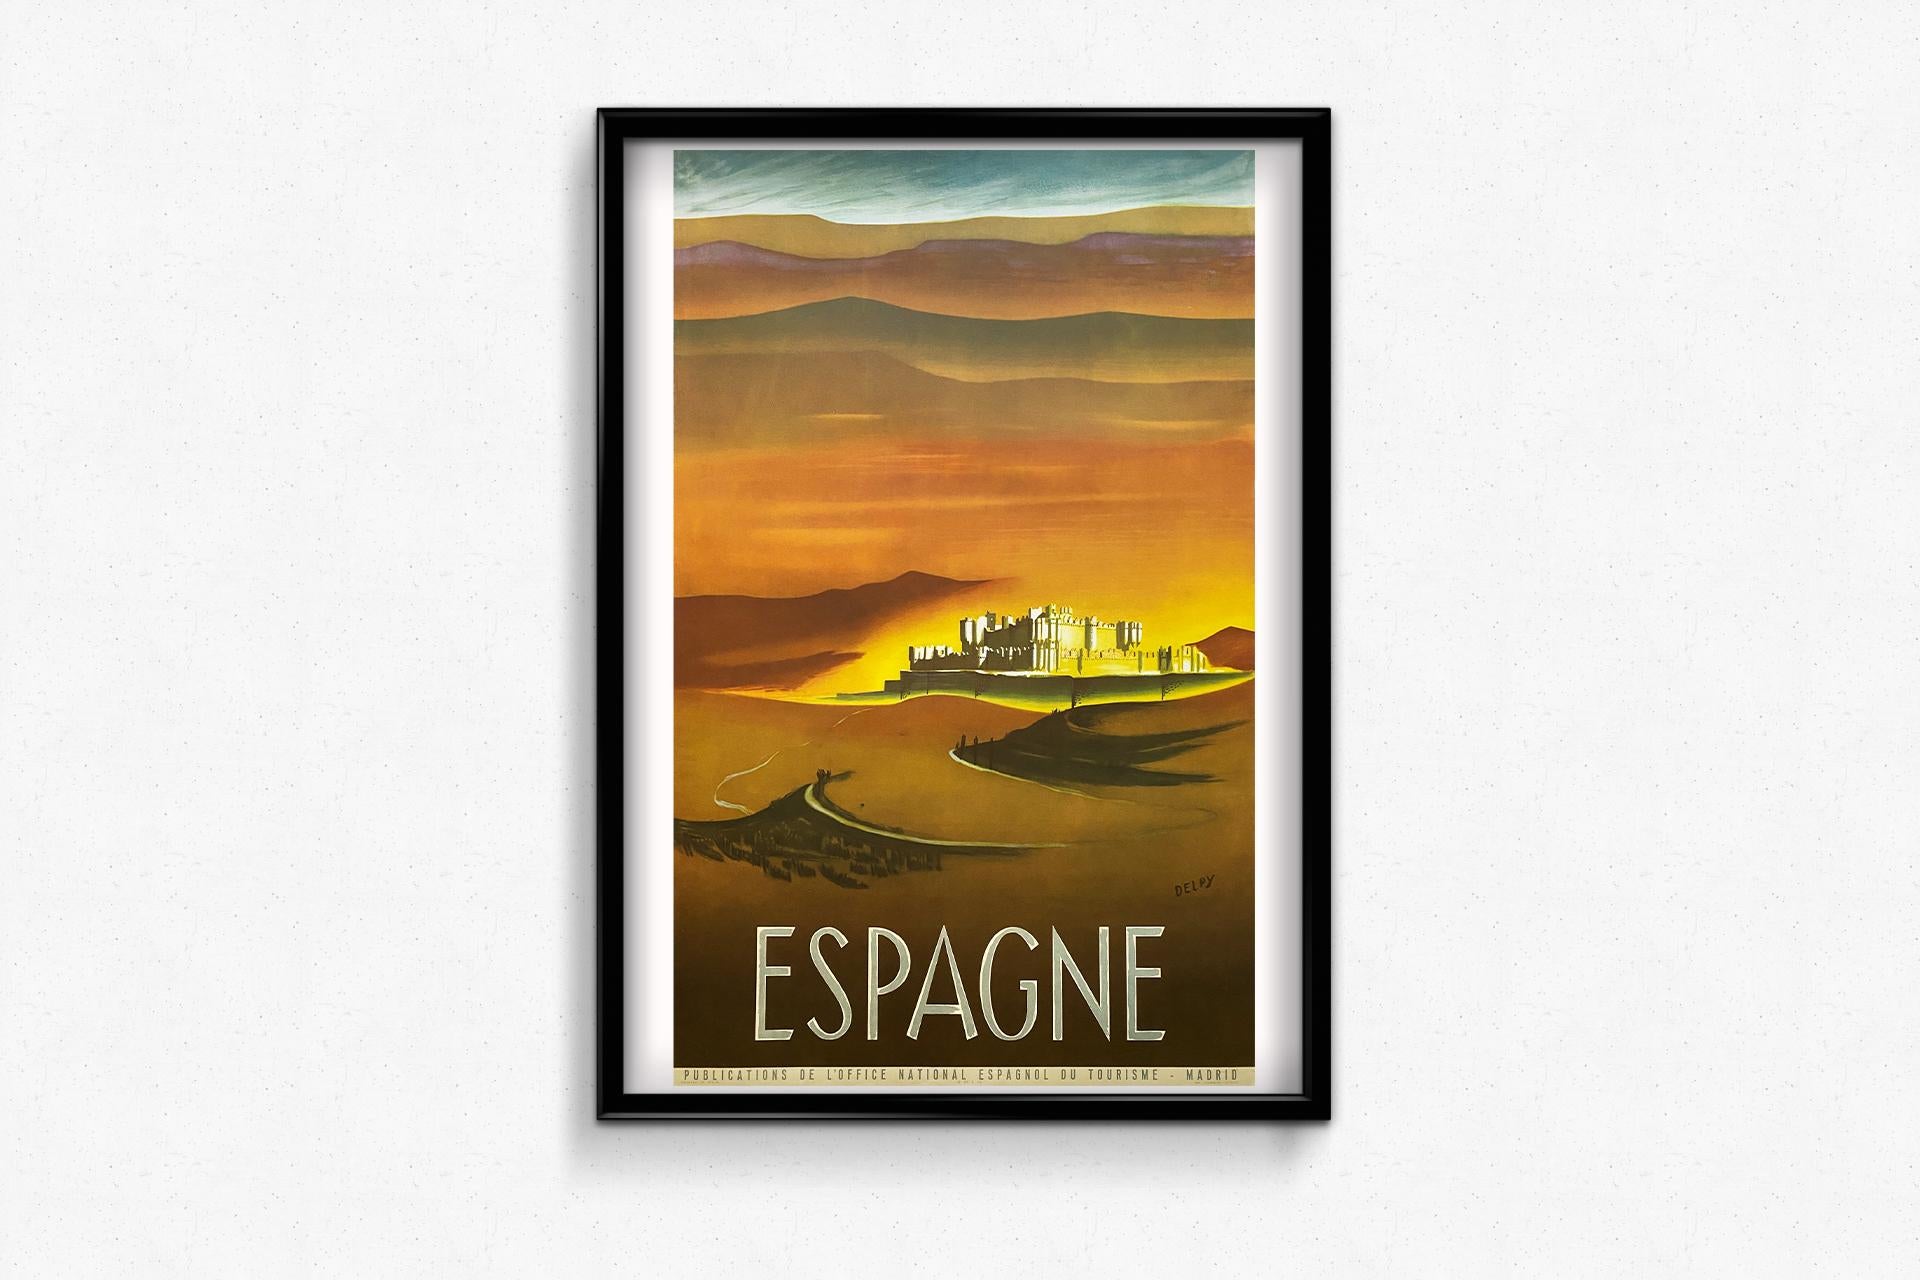 Original poster created by Delpy around 1945 to promote tourism in Spain.

Tourism - Château - Spain

Spanish National Office of Tourism

Printed by Fournier in Vitoria